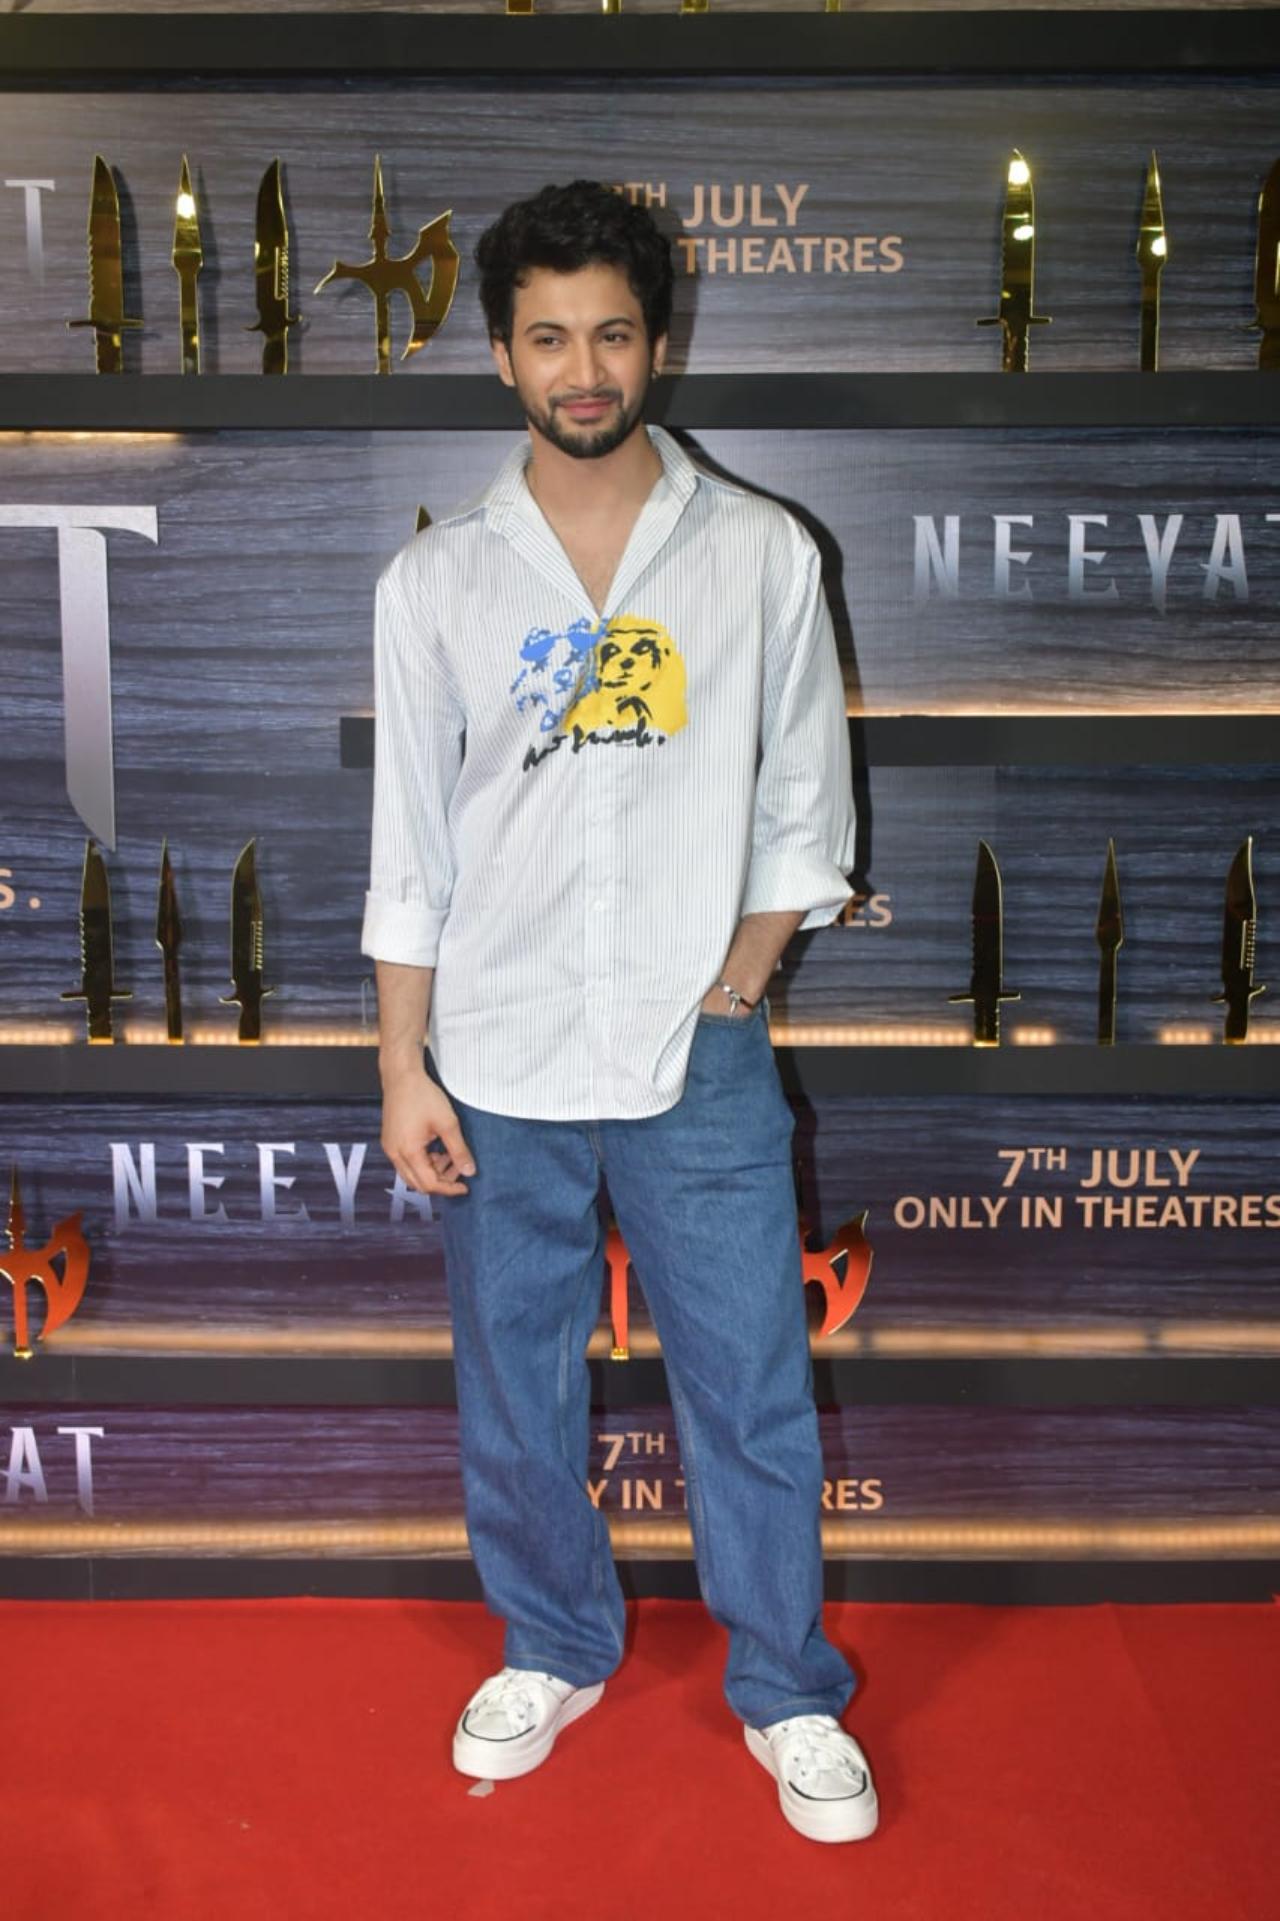 Actor Rohit Saraf sported a white shirt and blue denims for the screening of the film. The actor has worked with Neeyat star Prajakta Koli in the Netflix show 'Mismatched'